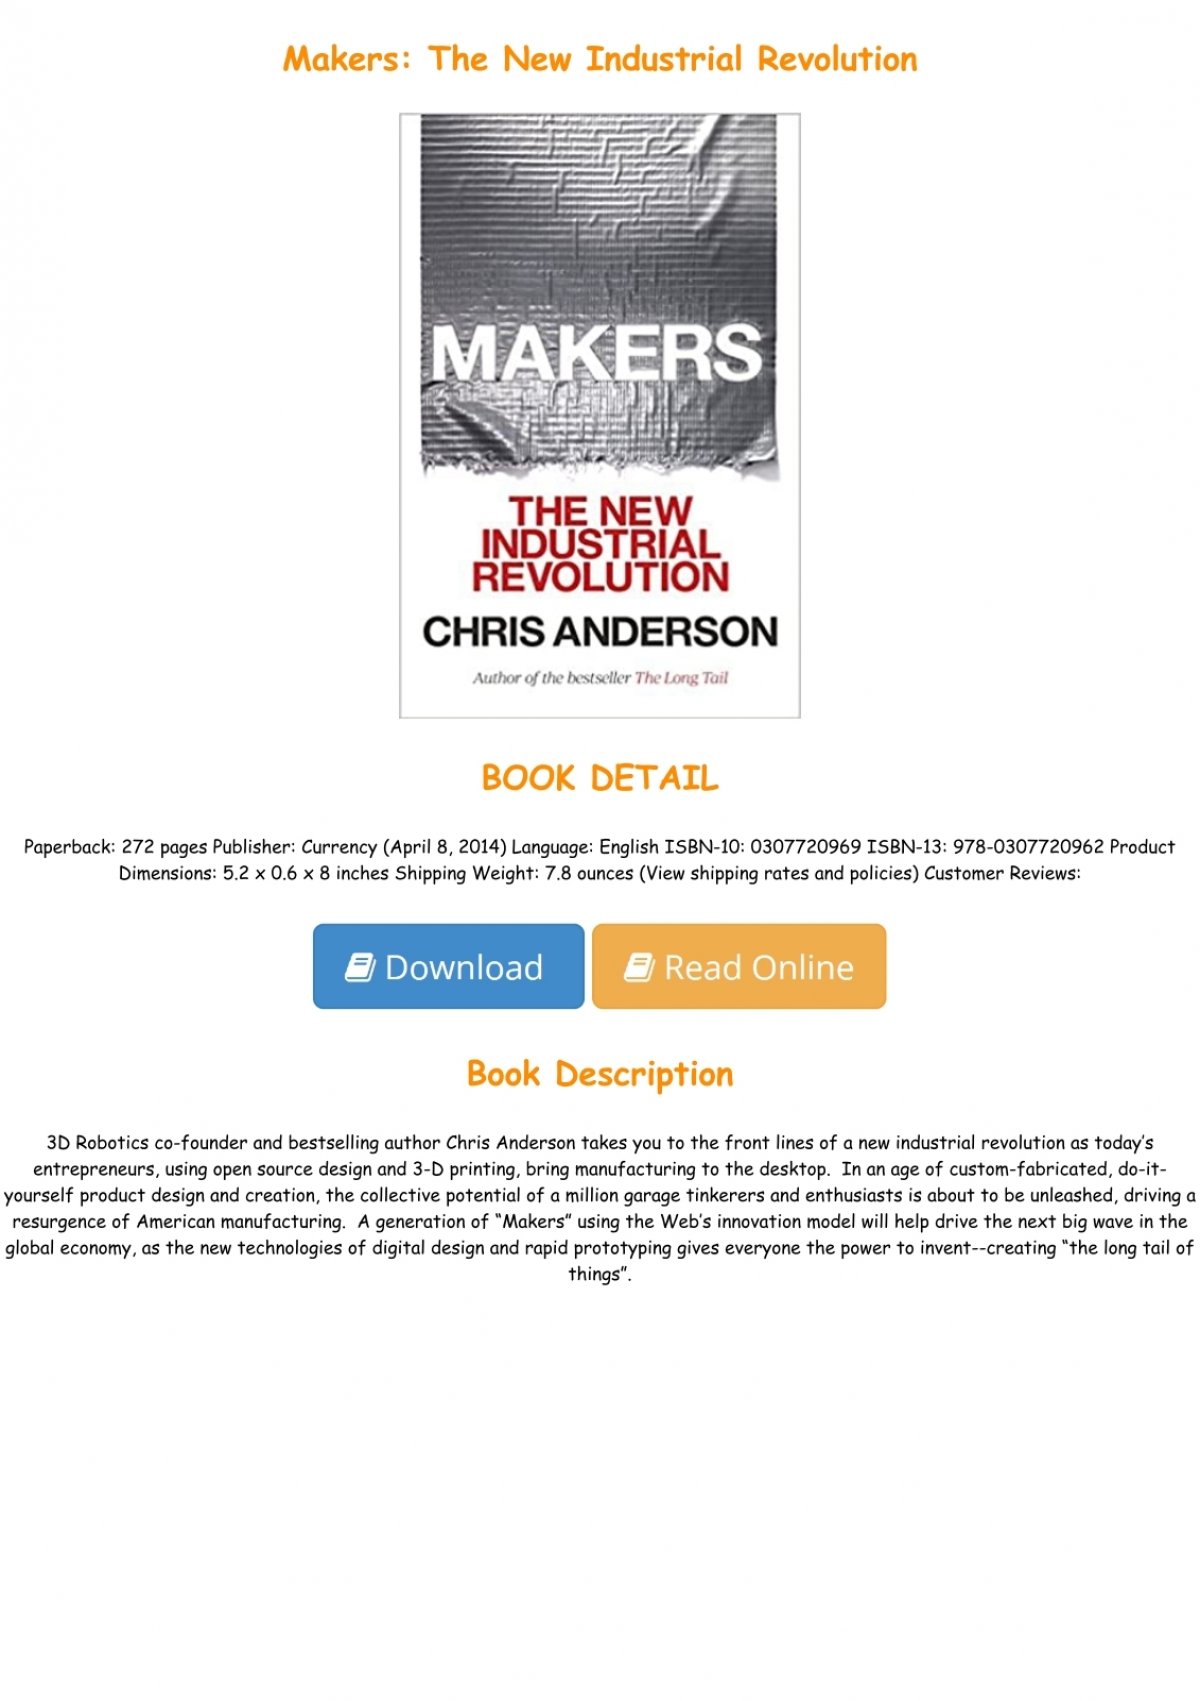 Makers: The New Industrial Revolution [Book]